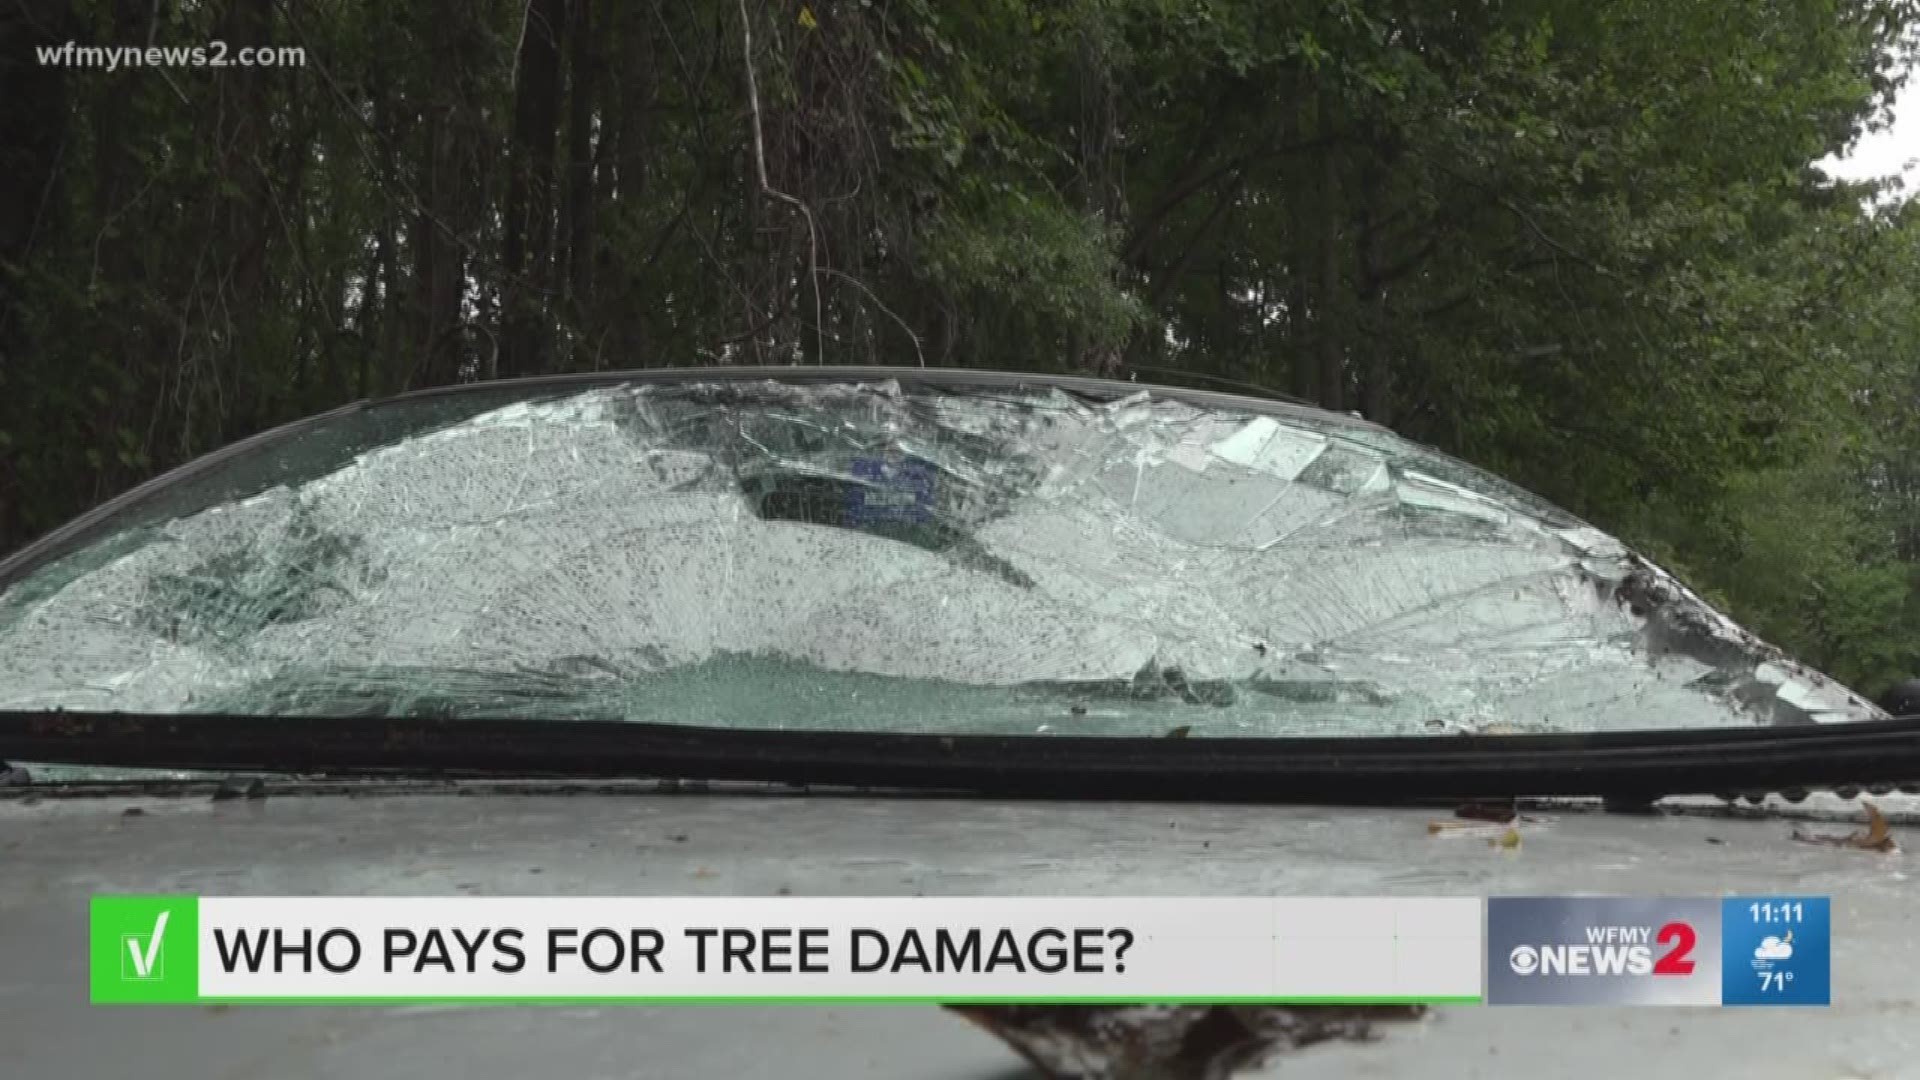 A viewer wanted to know if the damage cost would fall on the car owner or the property owner.